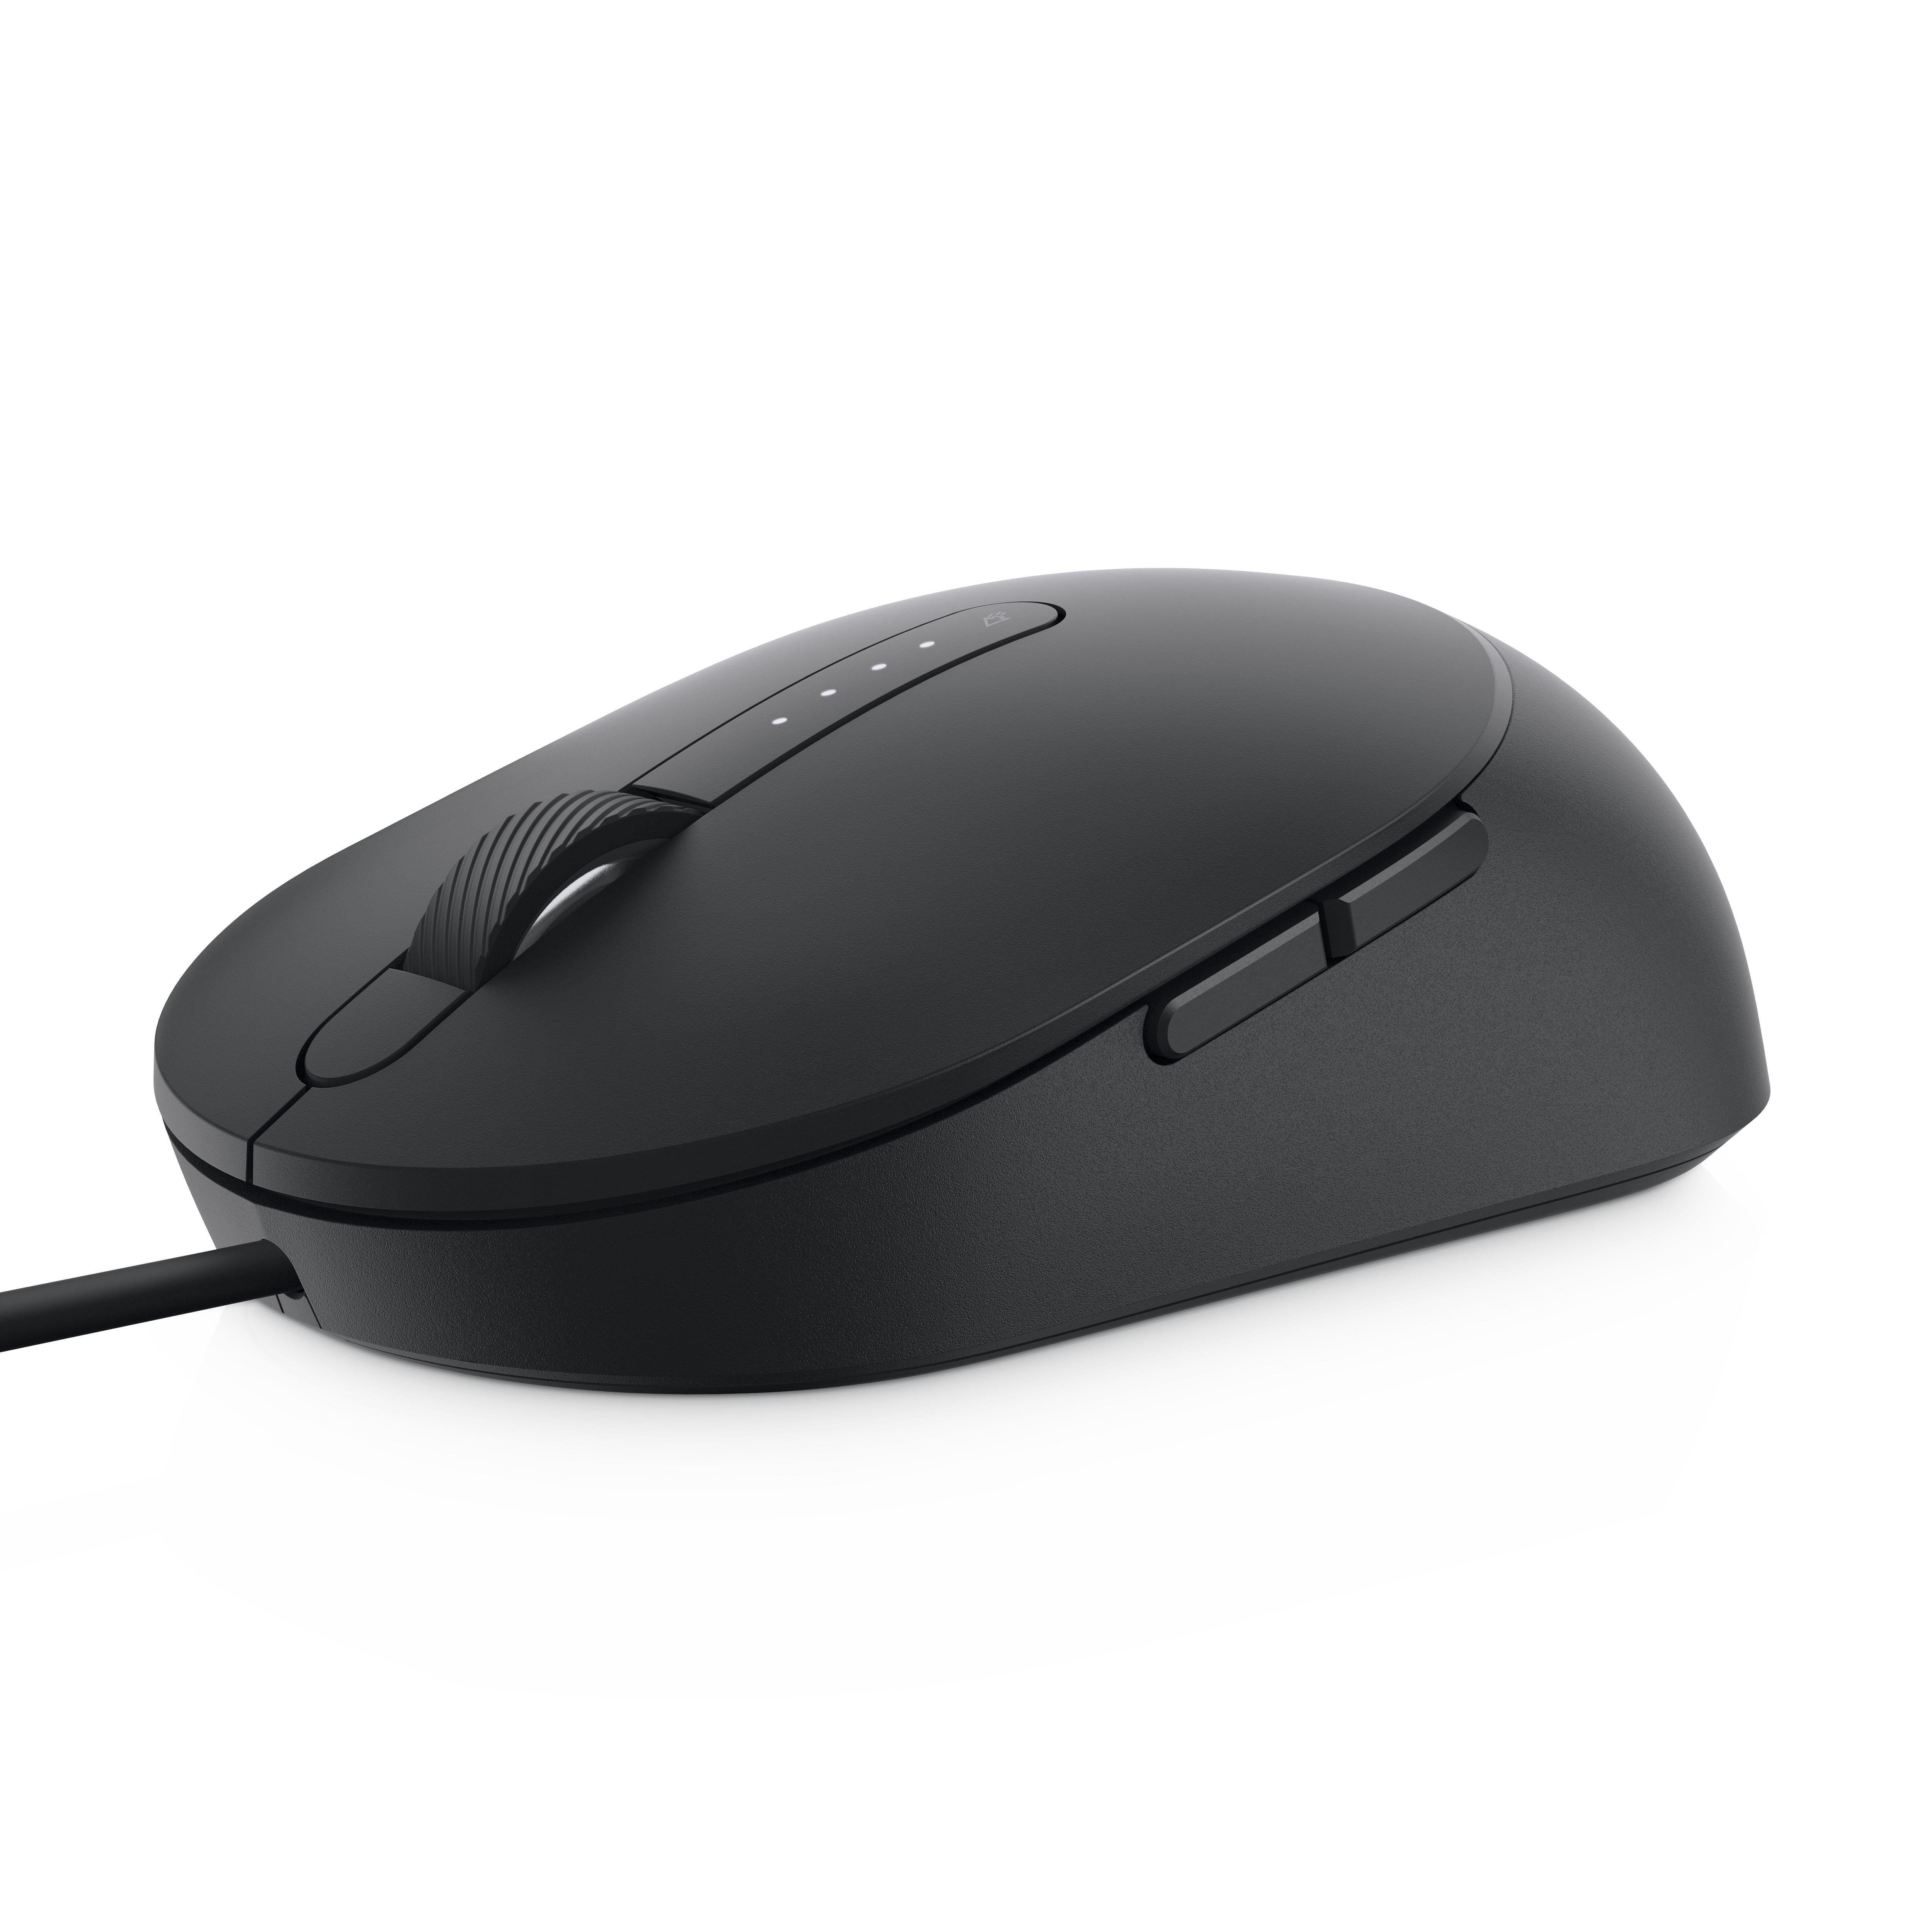 Dell MS3220 Wired Laser Mouse - Black [570-ABDY]